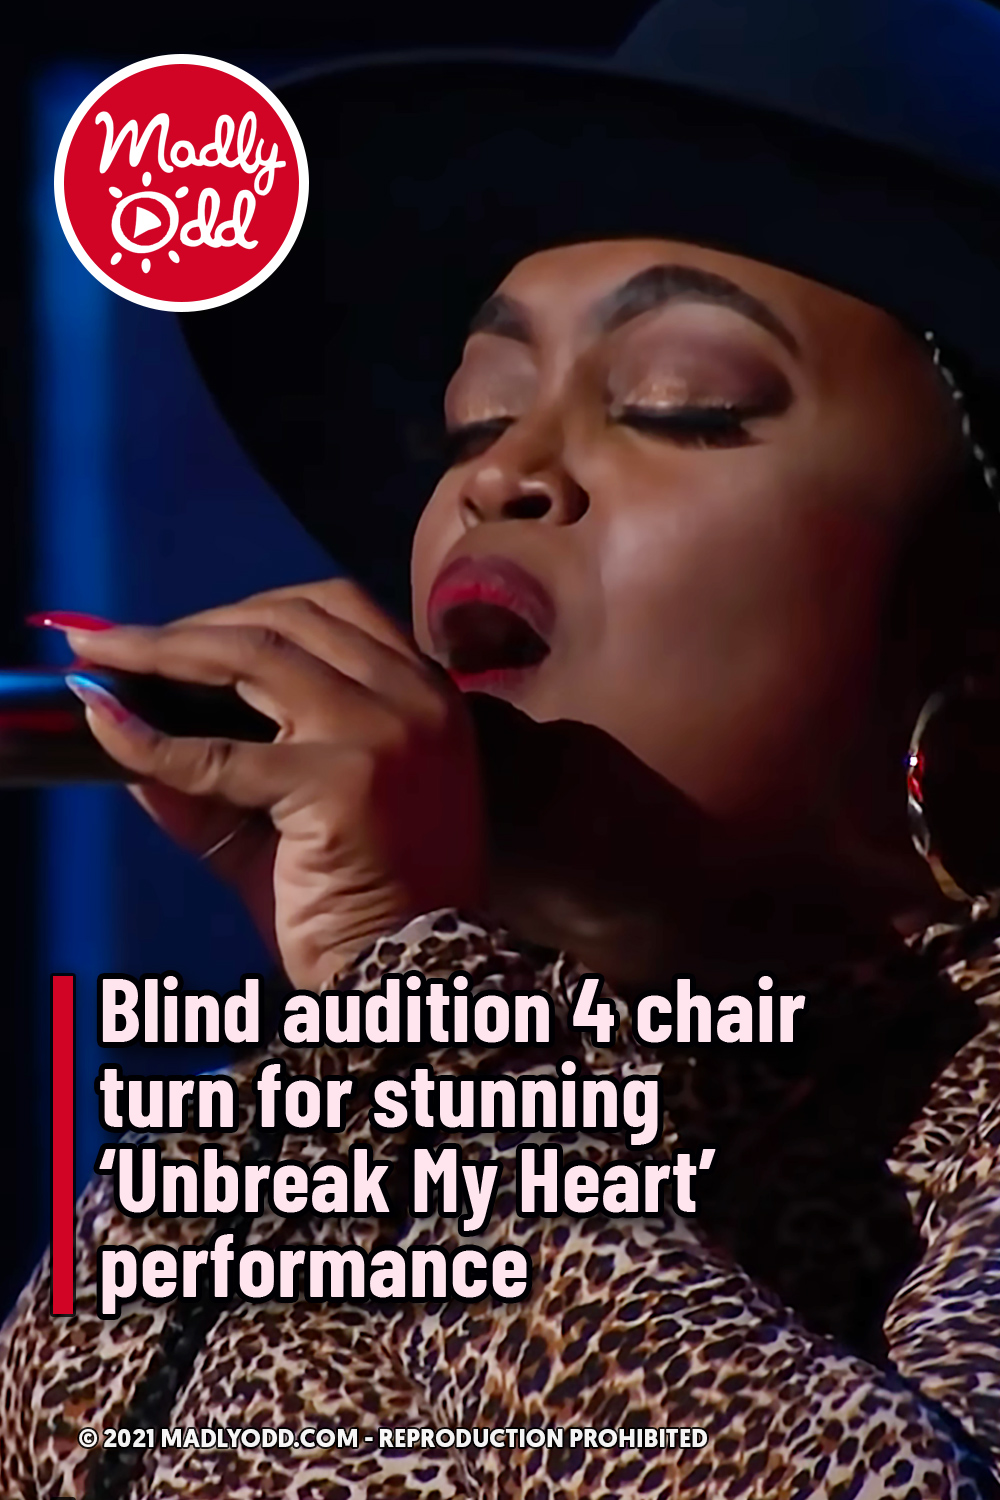 Blind audition 4 chair turn for stunning ‘Unbreak My Heart’ performance